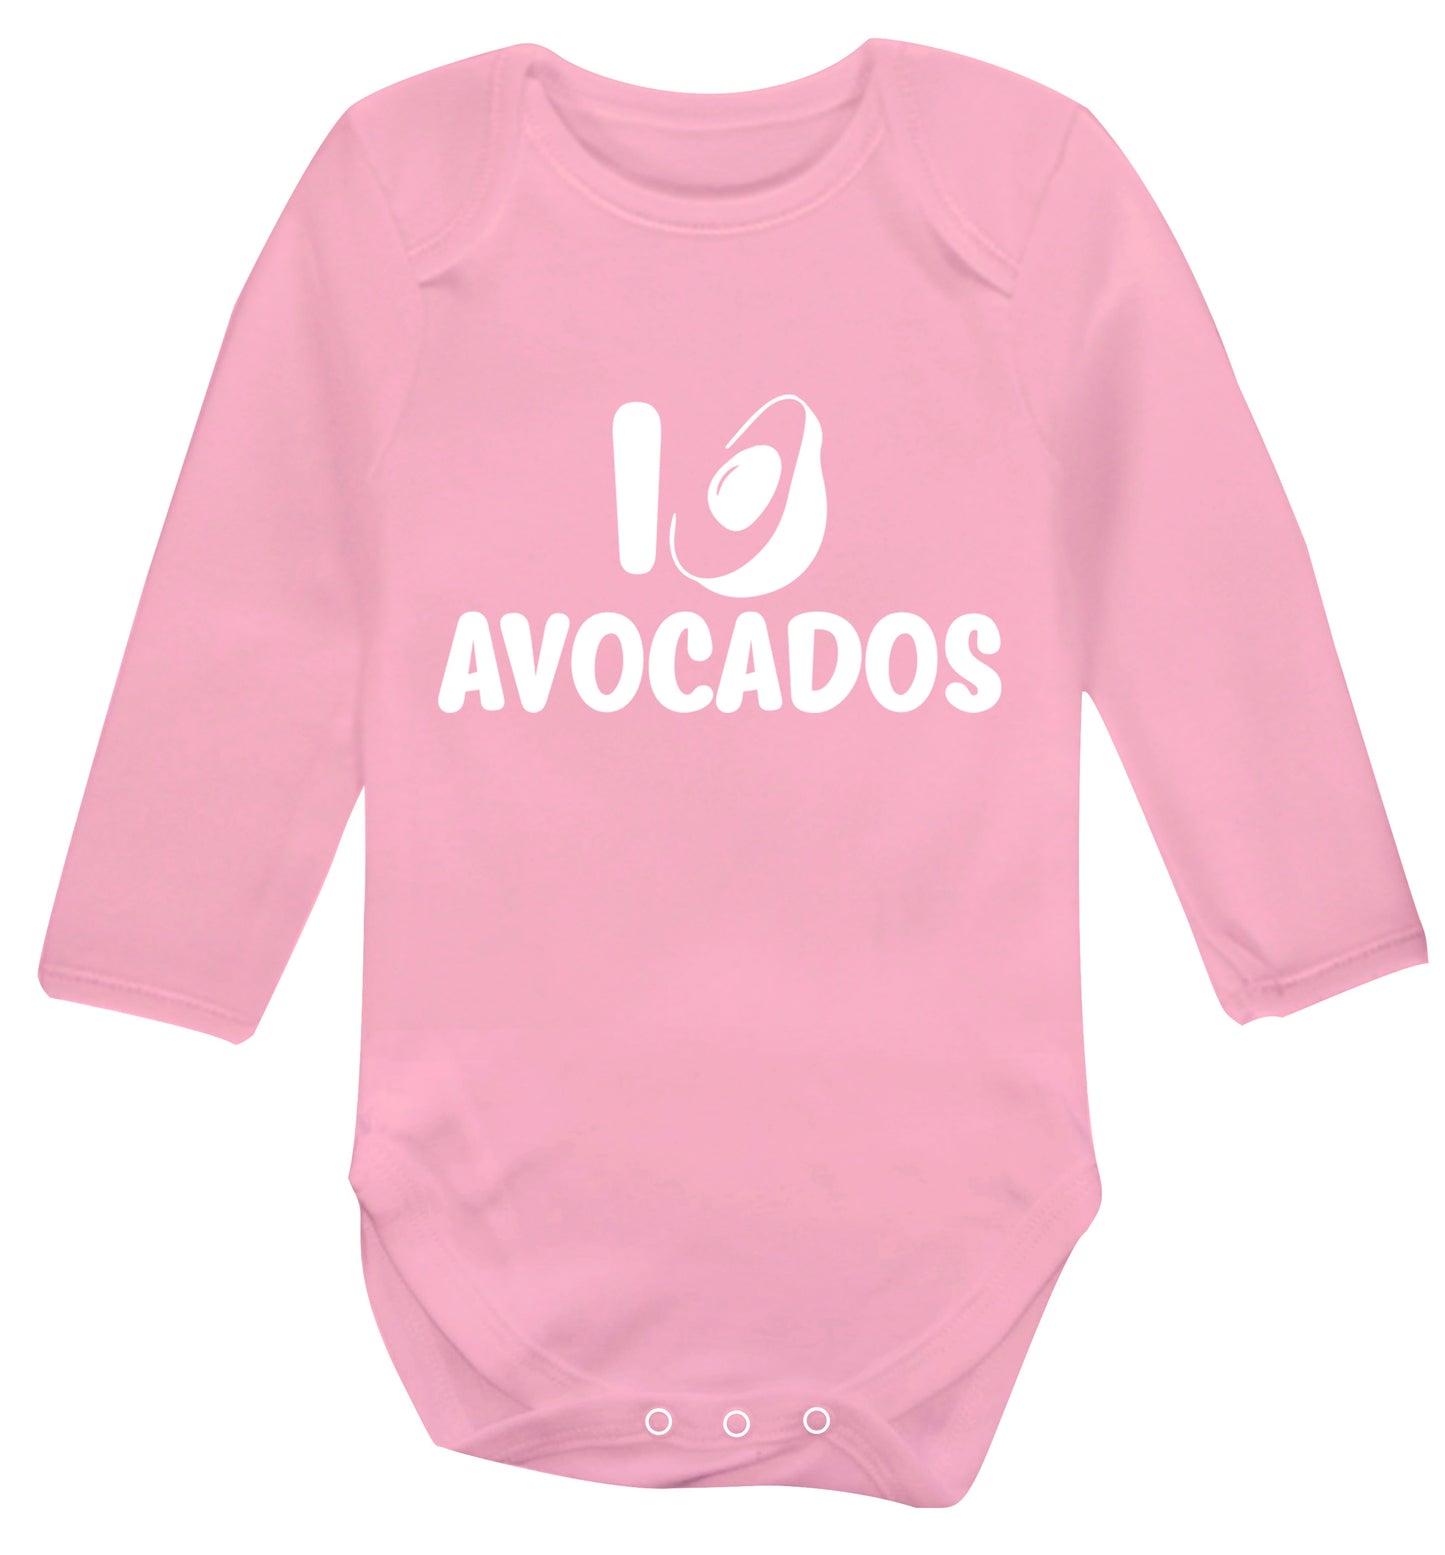 I love avocados Baby Vest long sleeved pale pink 6-12 months